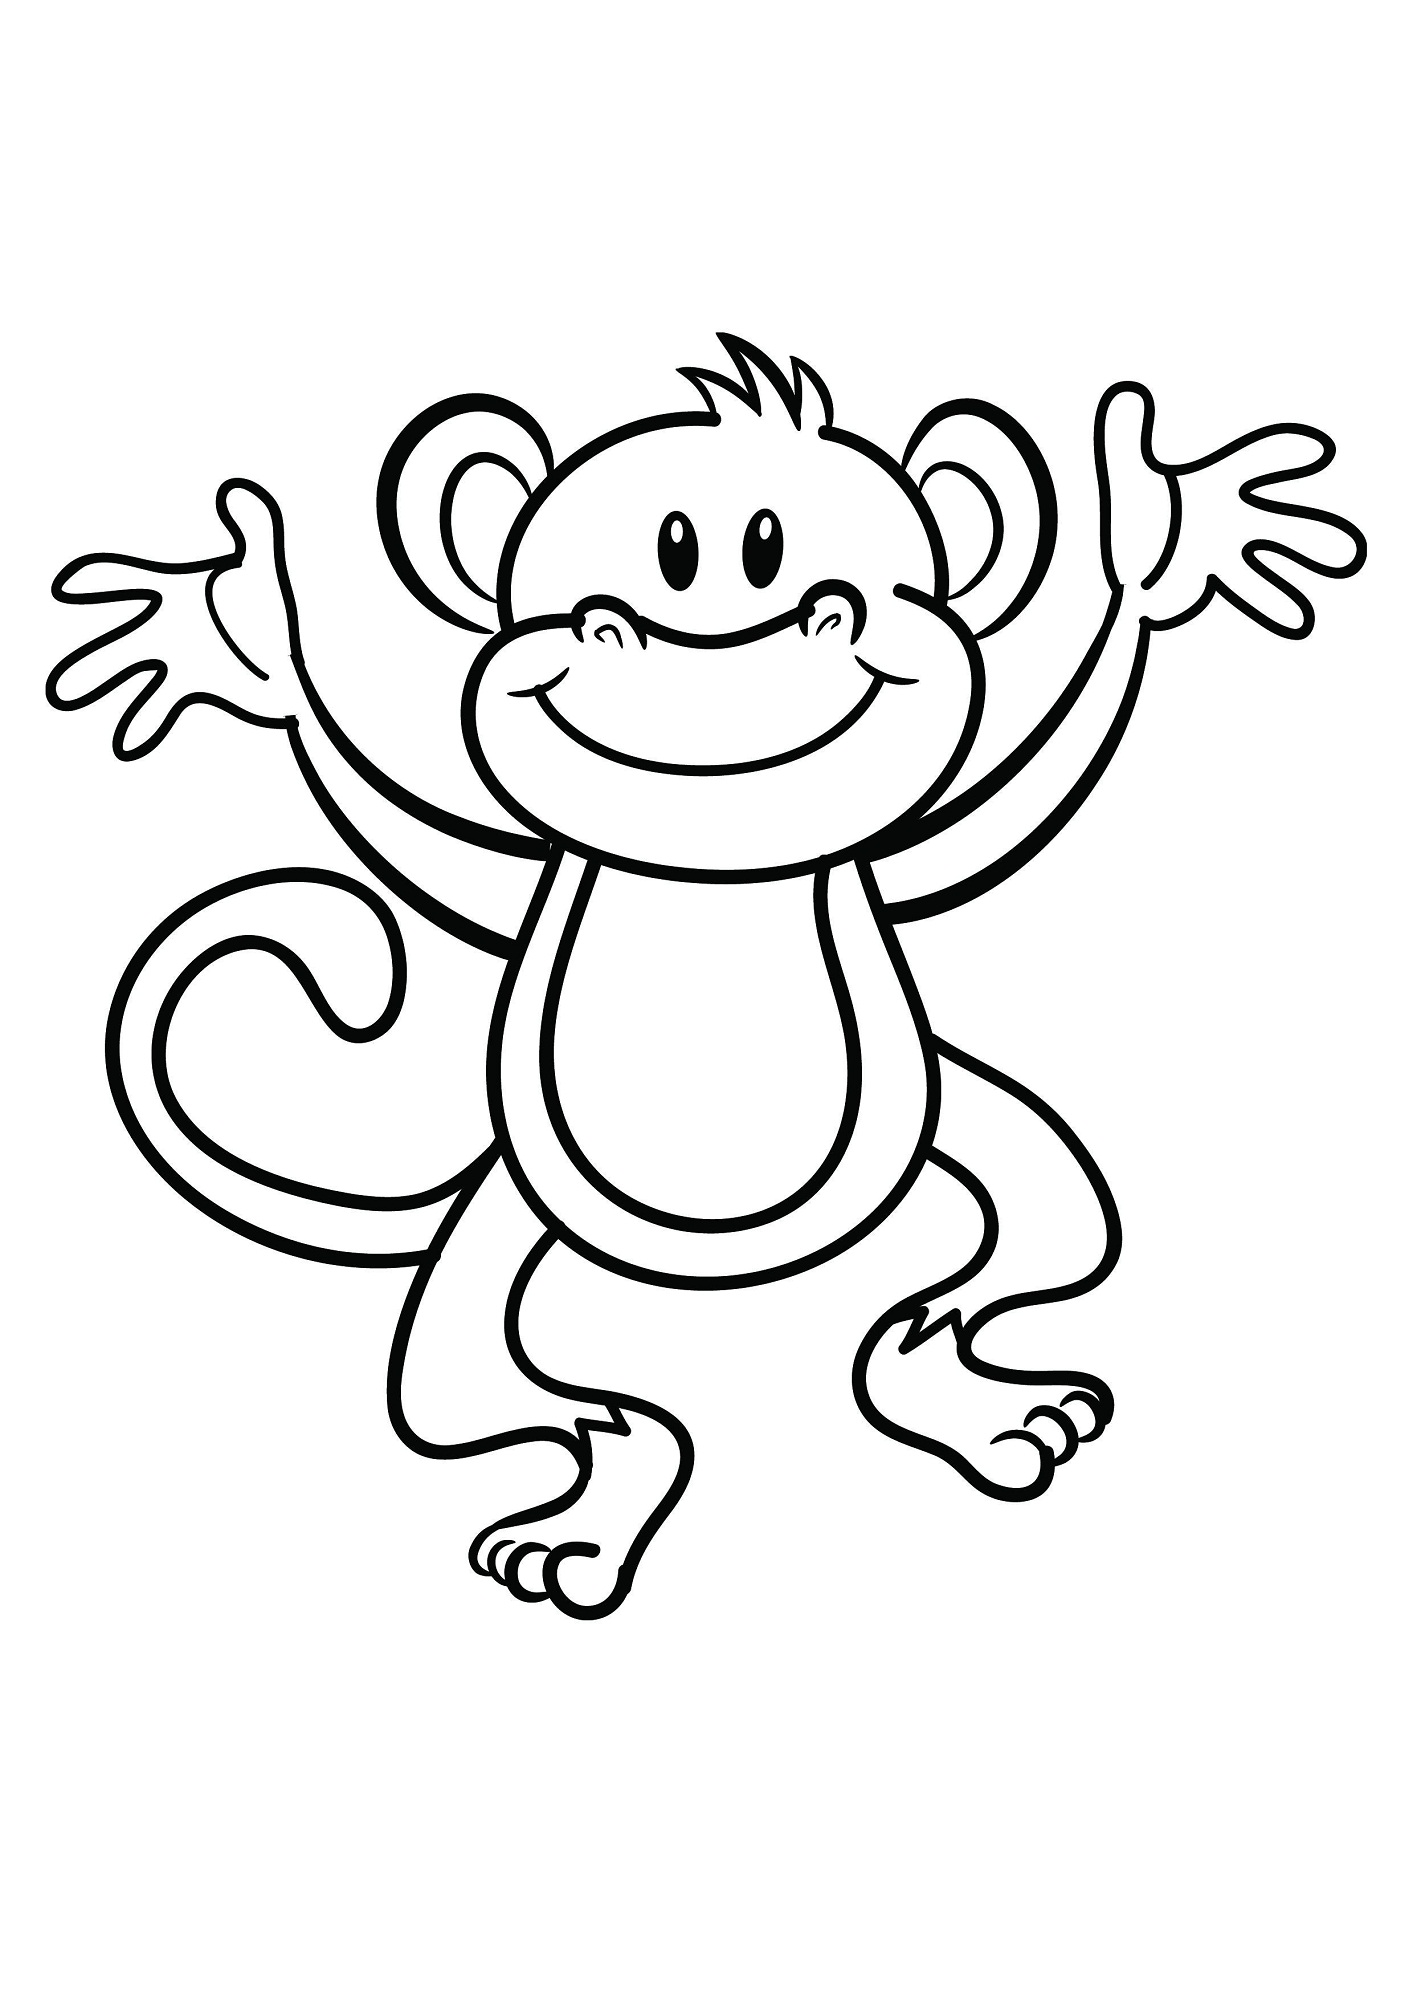 Download Coloring Pages of Monkeys Printable | Activity Shelter